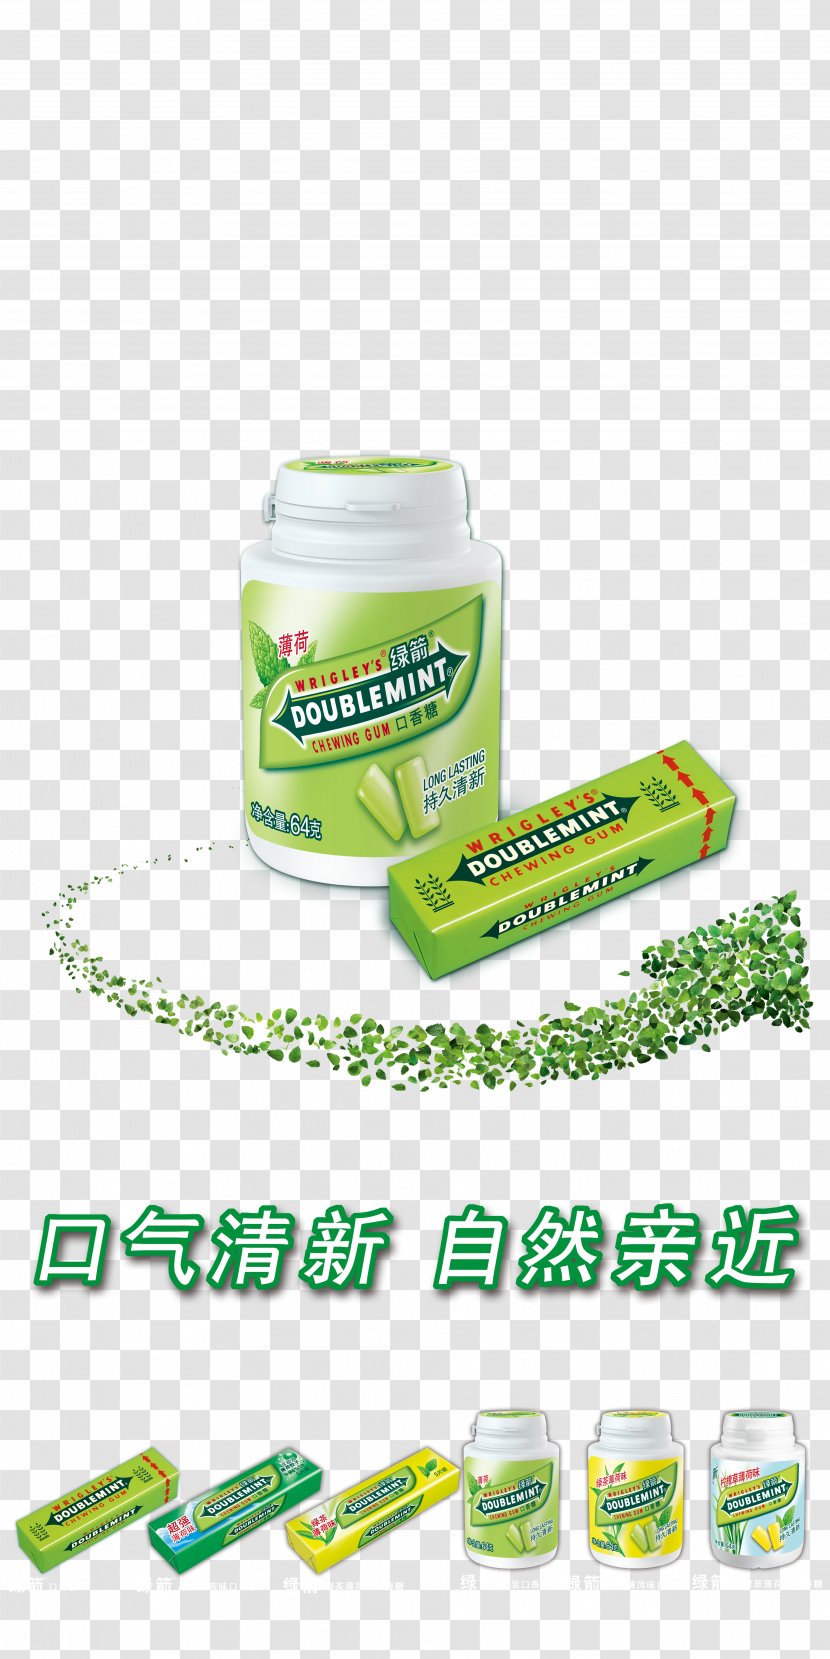 Chewing Gum Doublemint Wrigley Company Transparent PNG